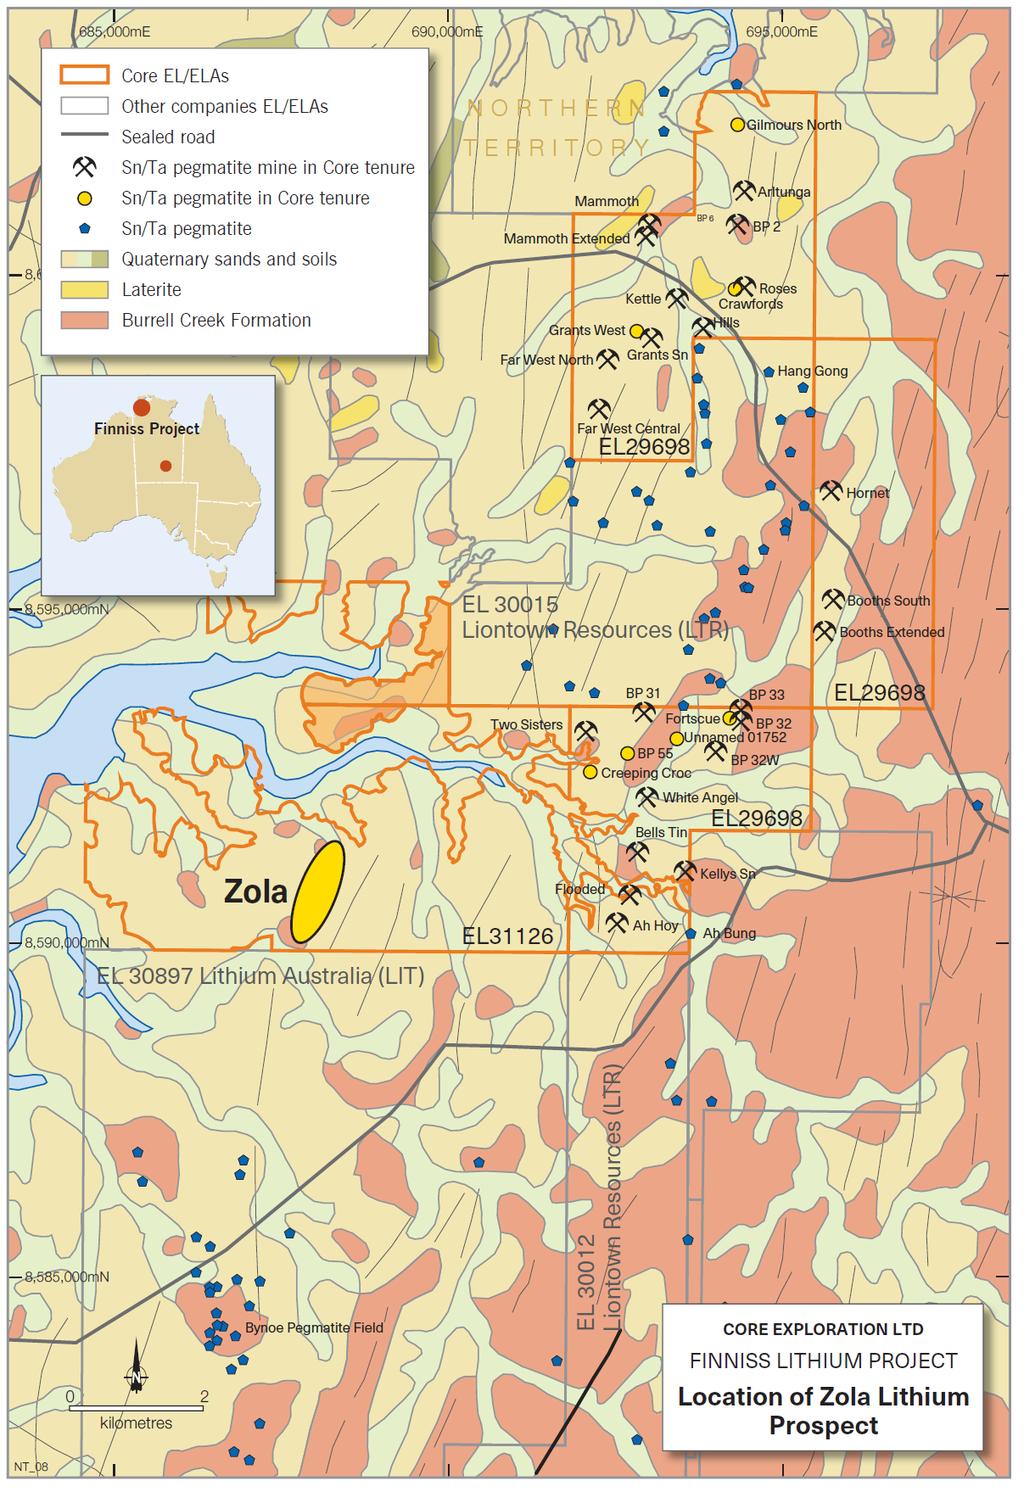 Core is continuing sampling and exploration of pegmatites in the Finniss Lithium Project to define and prioritise drilling of potential targets.